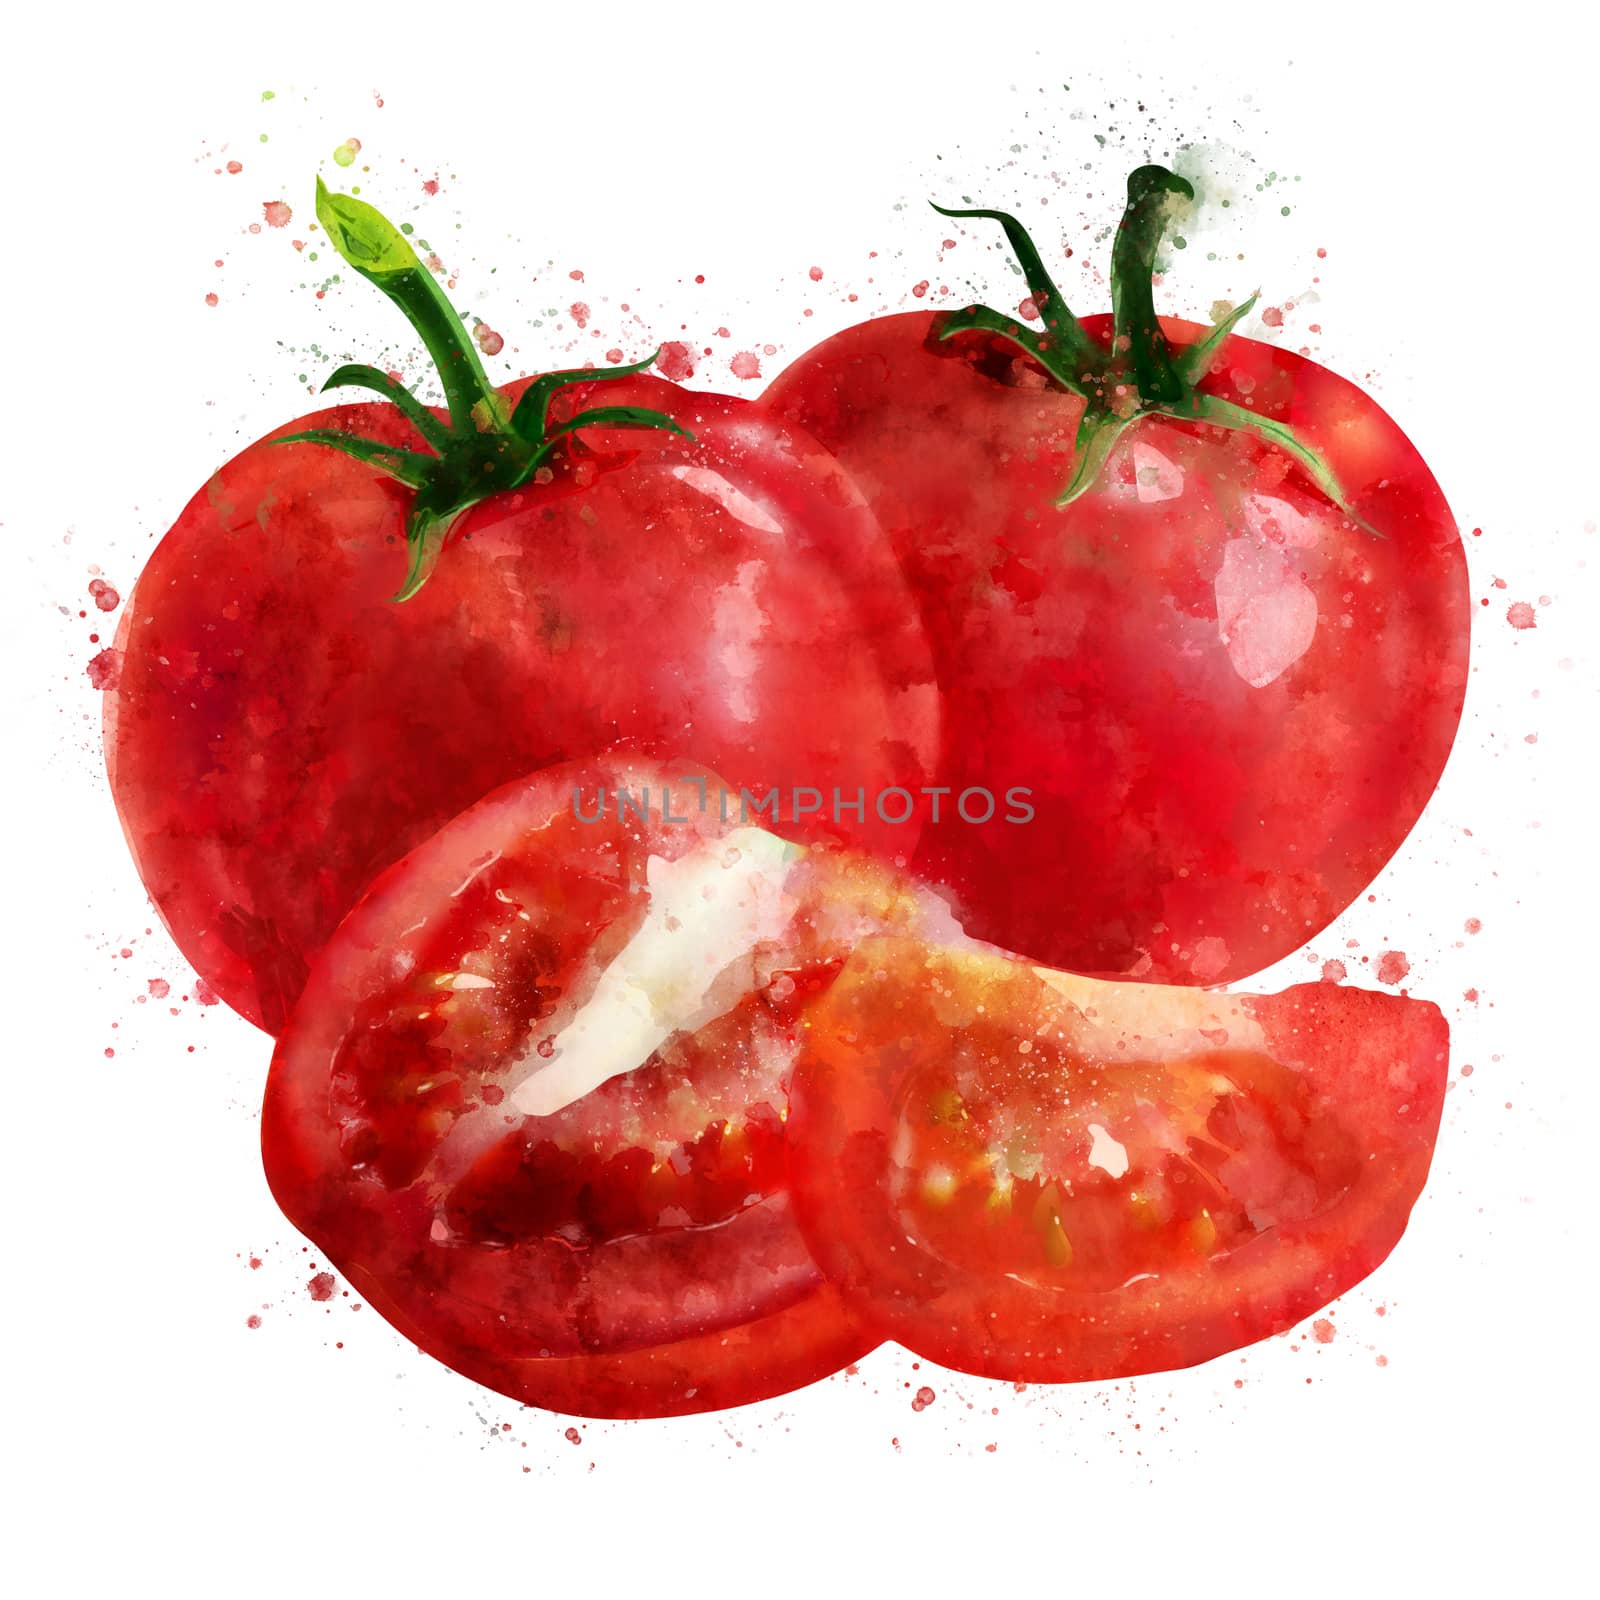 Tomato on white background. Watercolor illustration by ConceptCafe